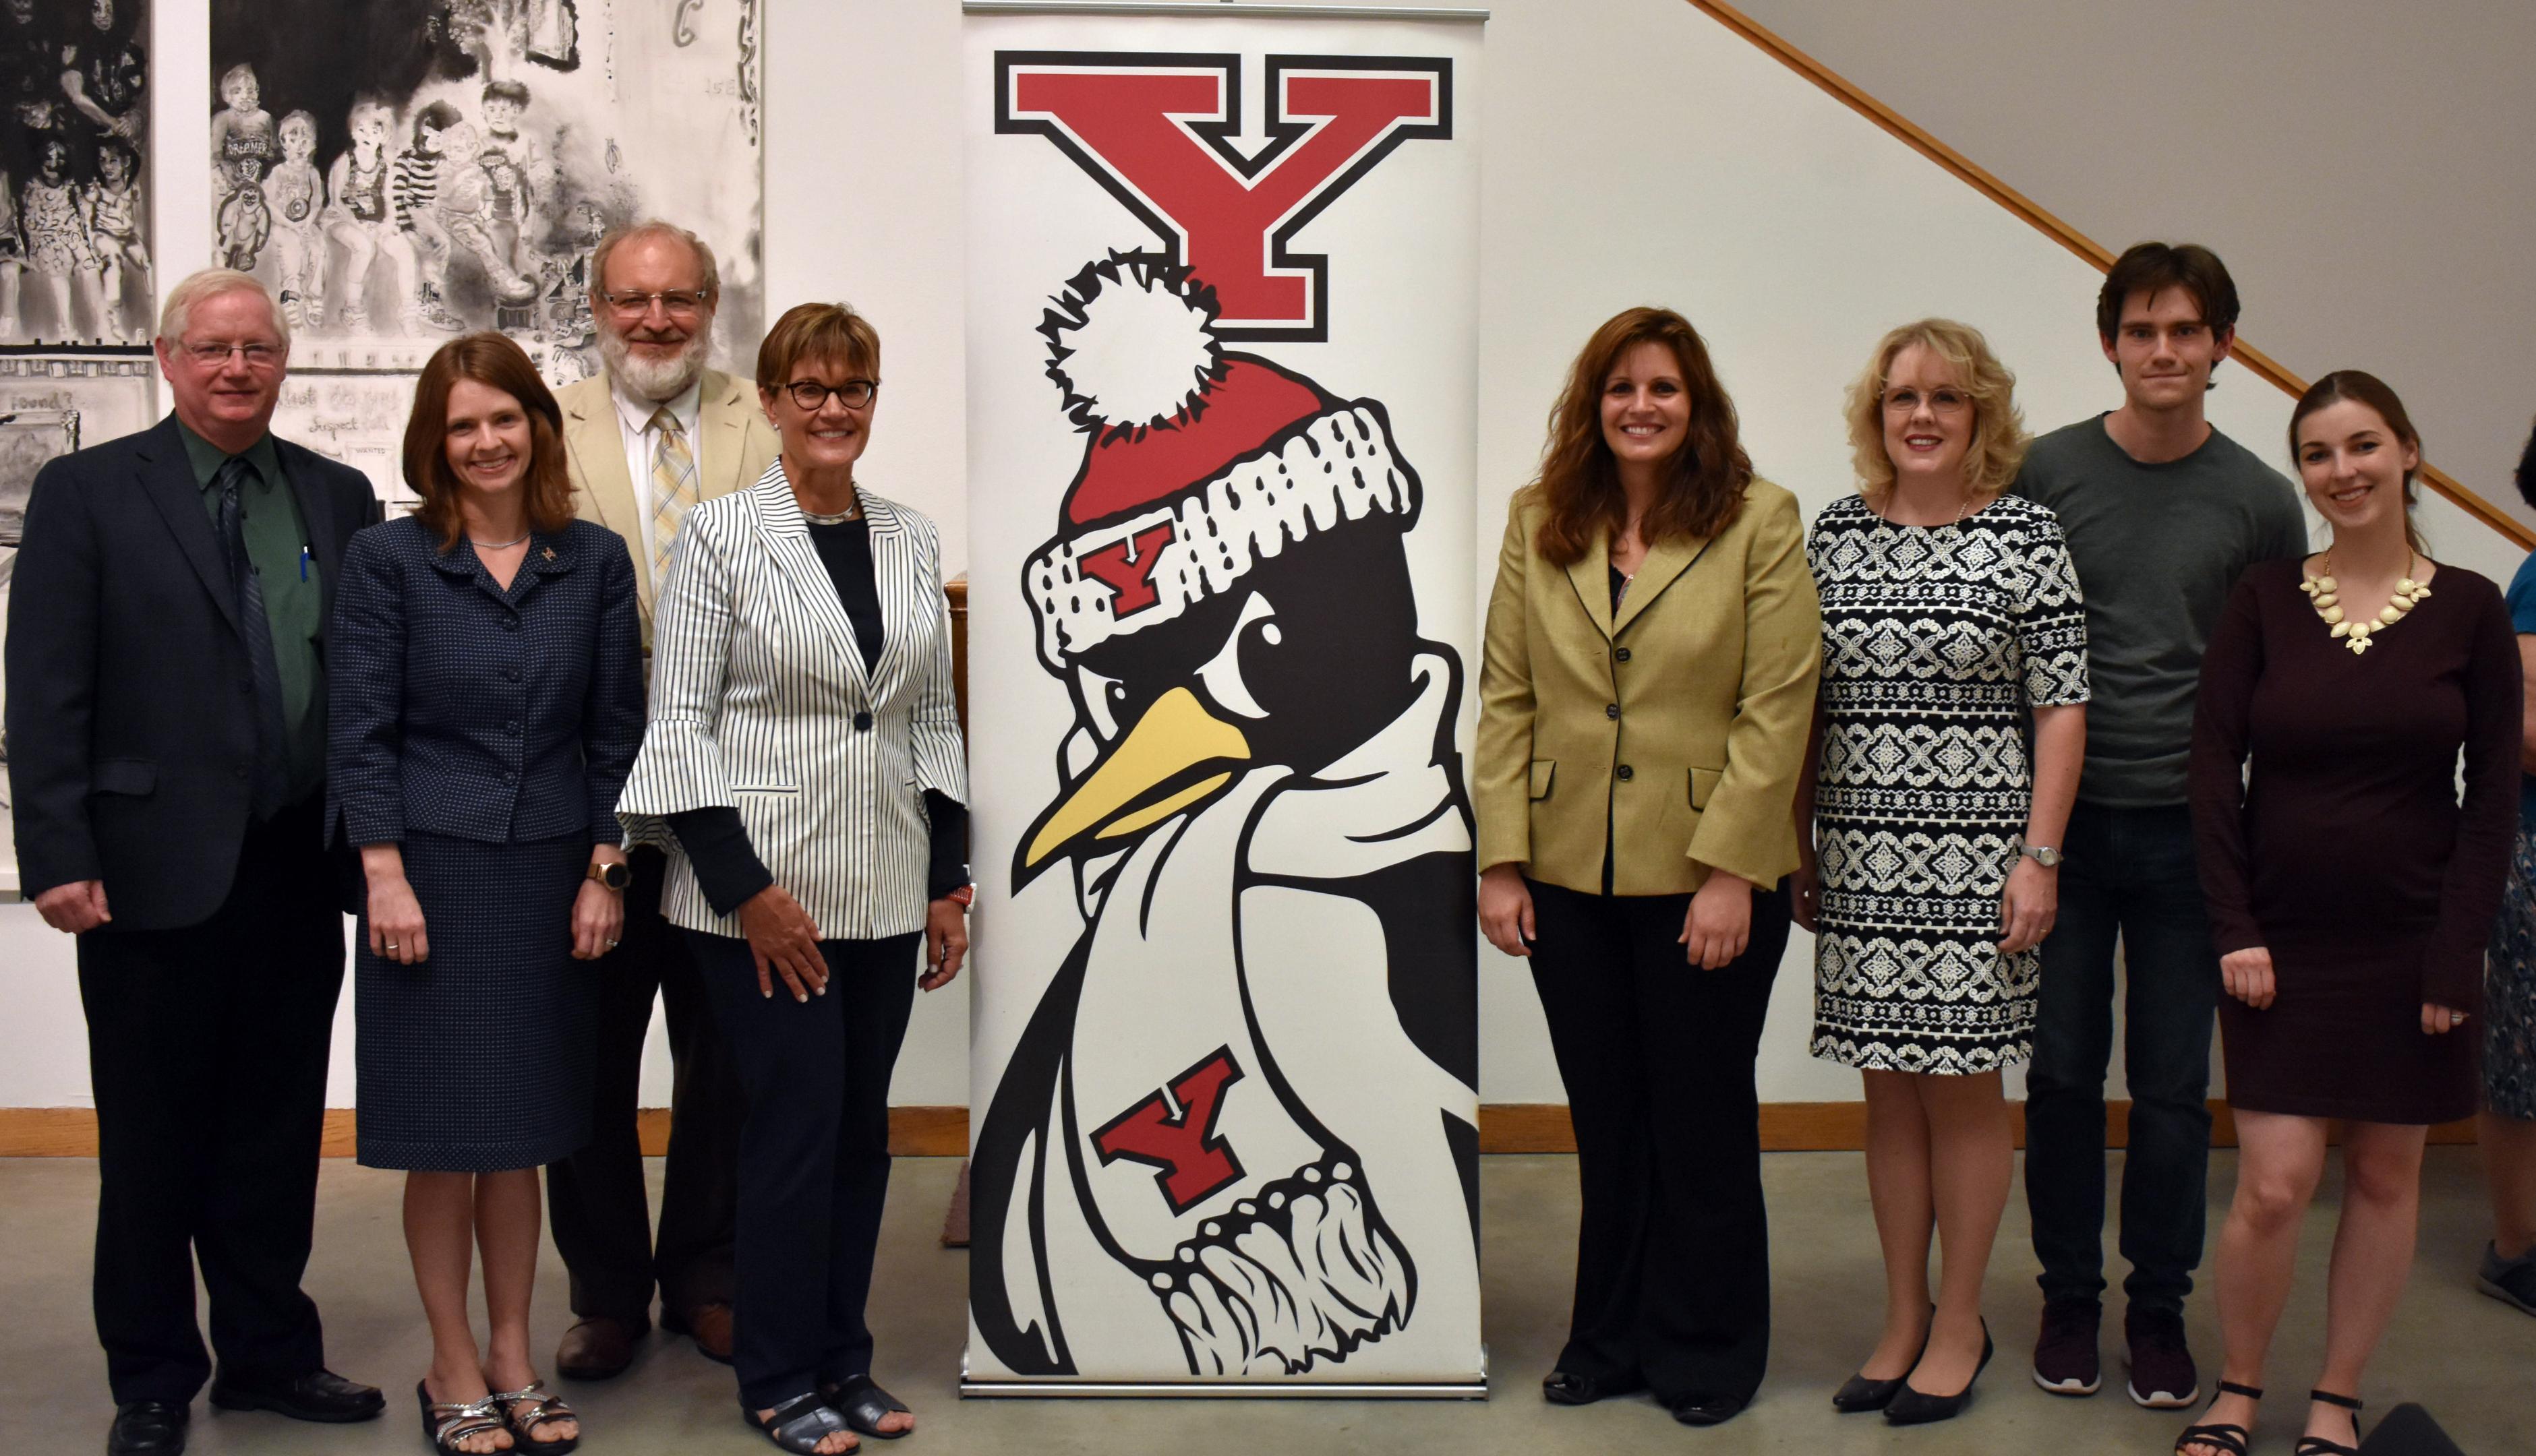 The Founding Board of Governor’s for the Youngstown Press Club 